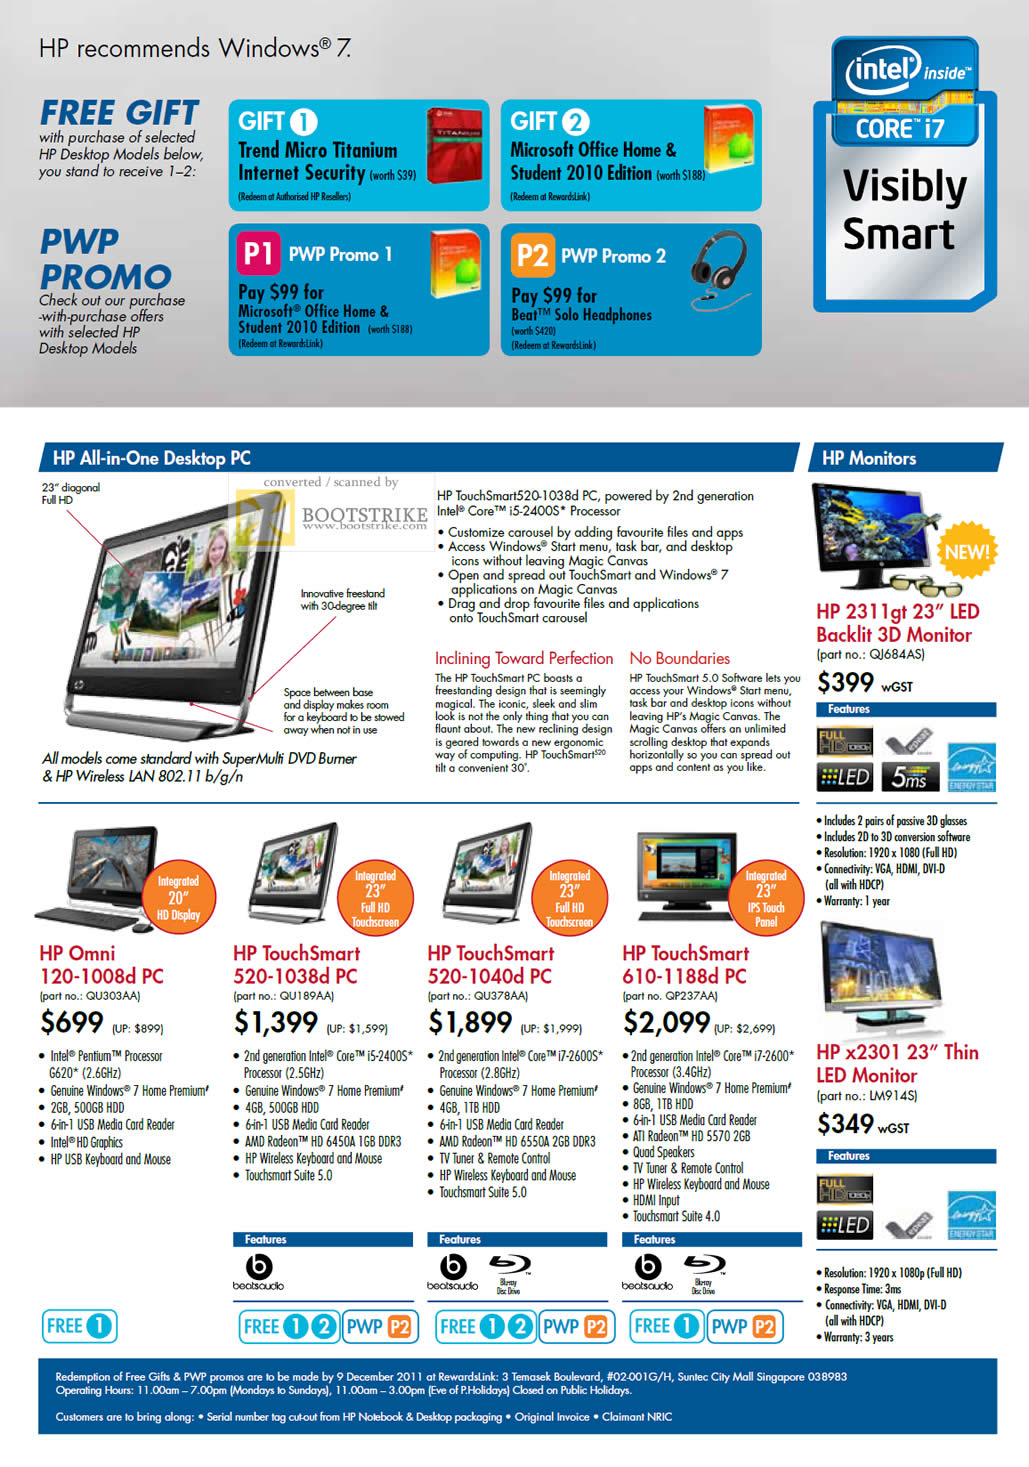 SITEX 2011 price list image brochure of HP AIO Desktop PC Omni 120-1008d, TouchSmart 520-1038d, TouchSmart 520-1040d, TouchSmart 610-1188d, 2311gt LED 3D Monitor, X2301